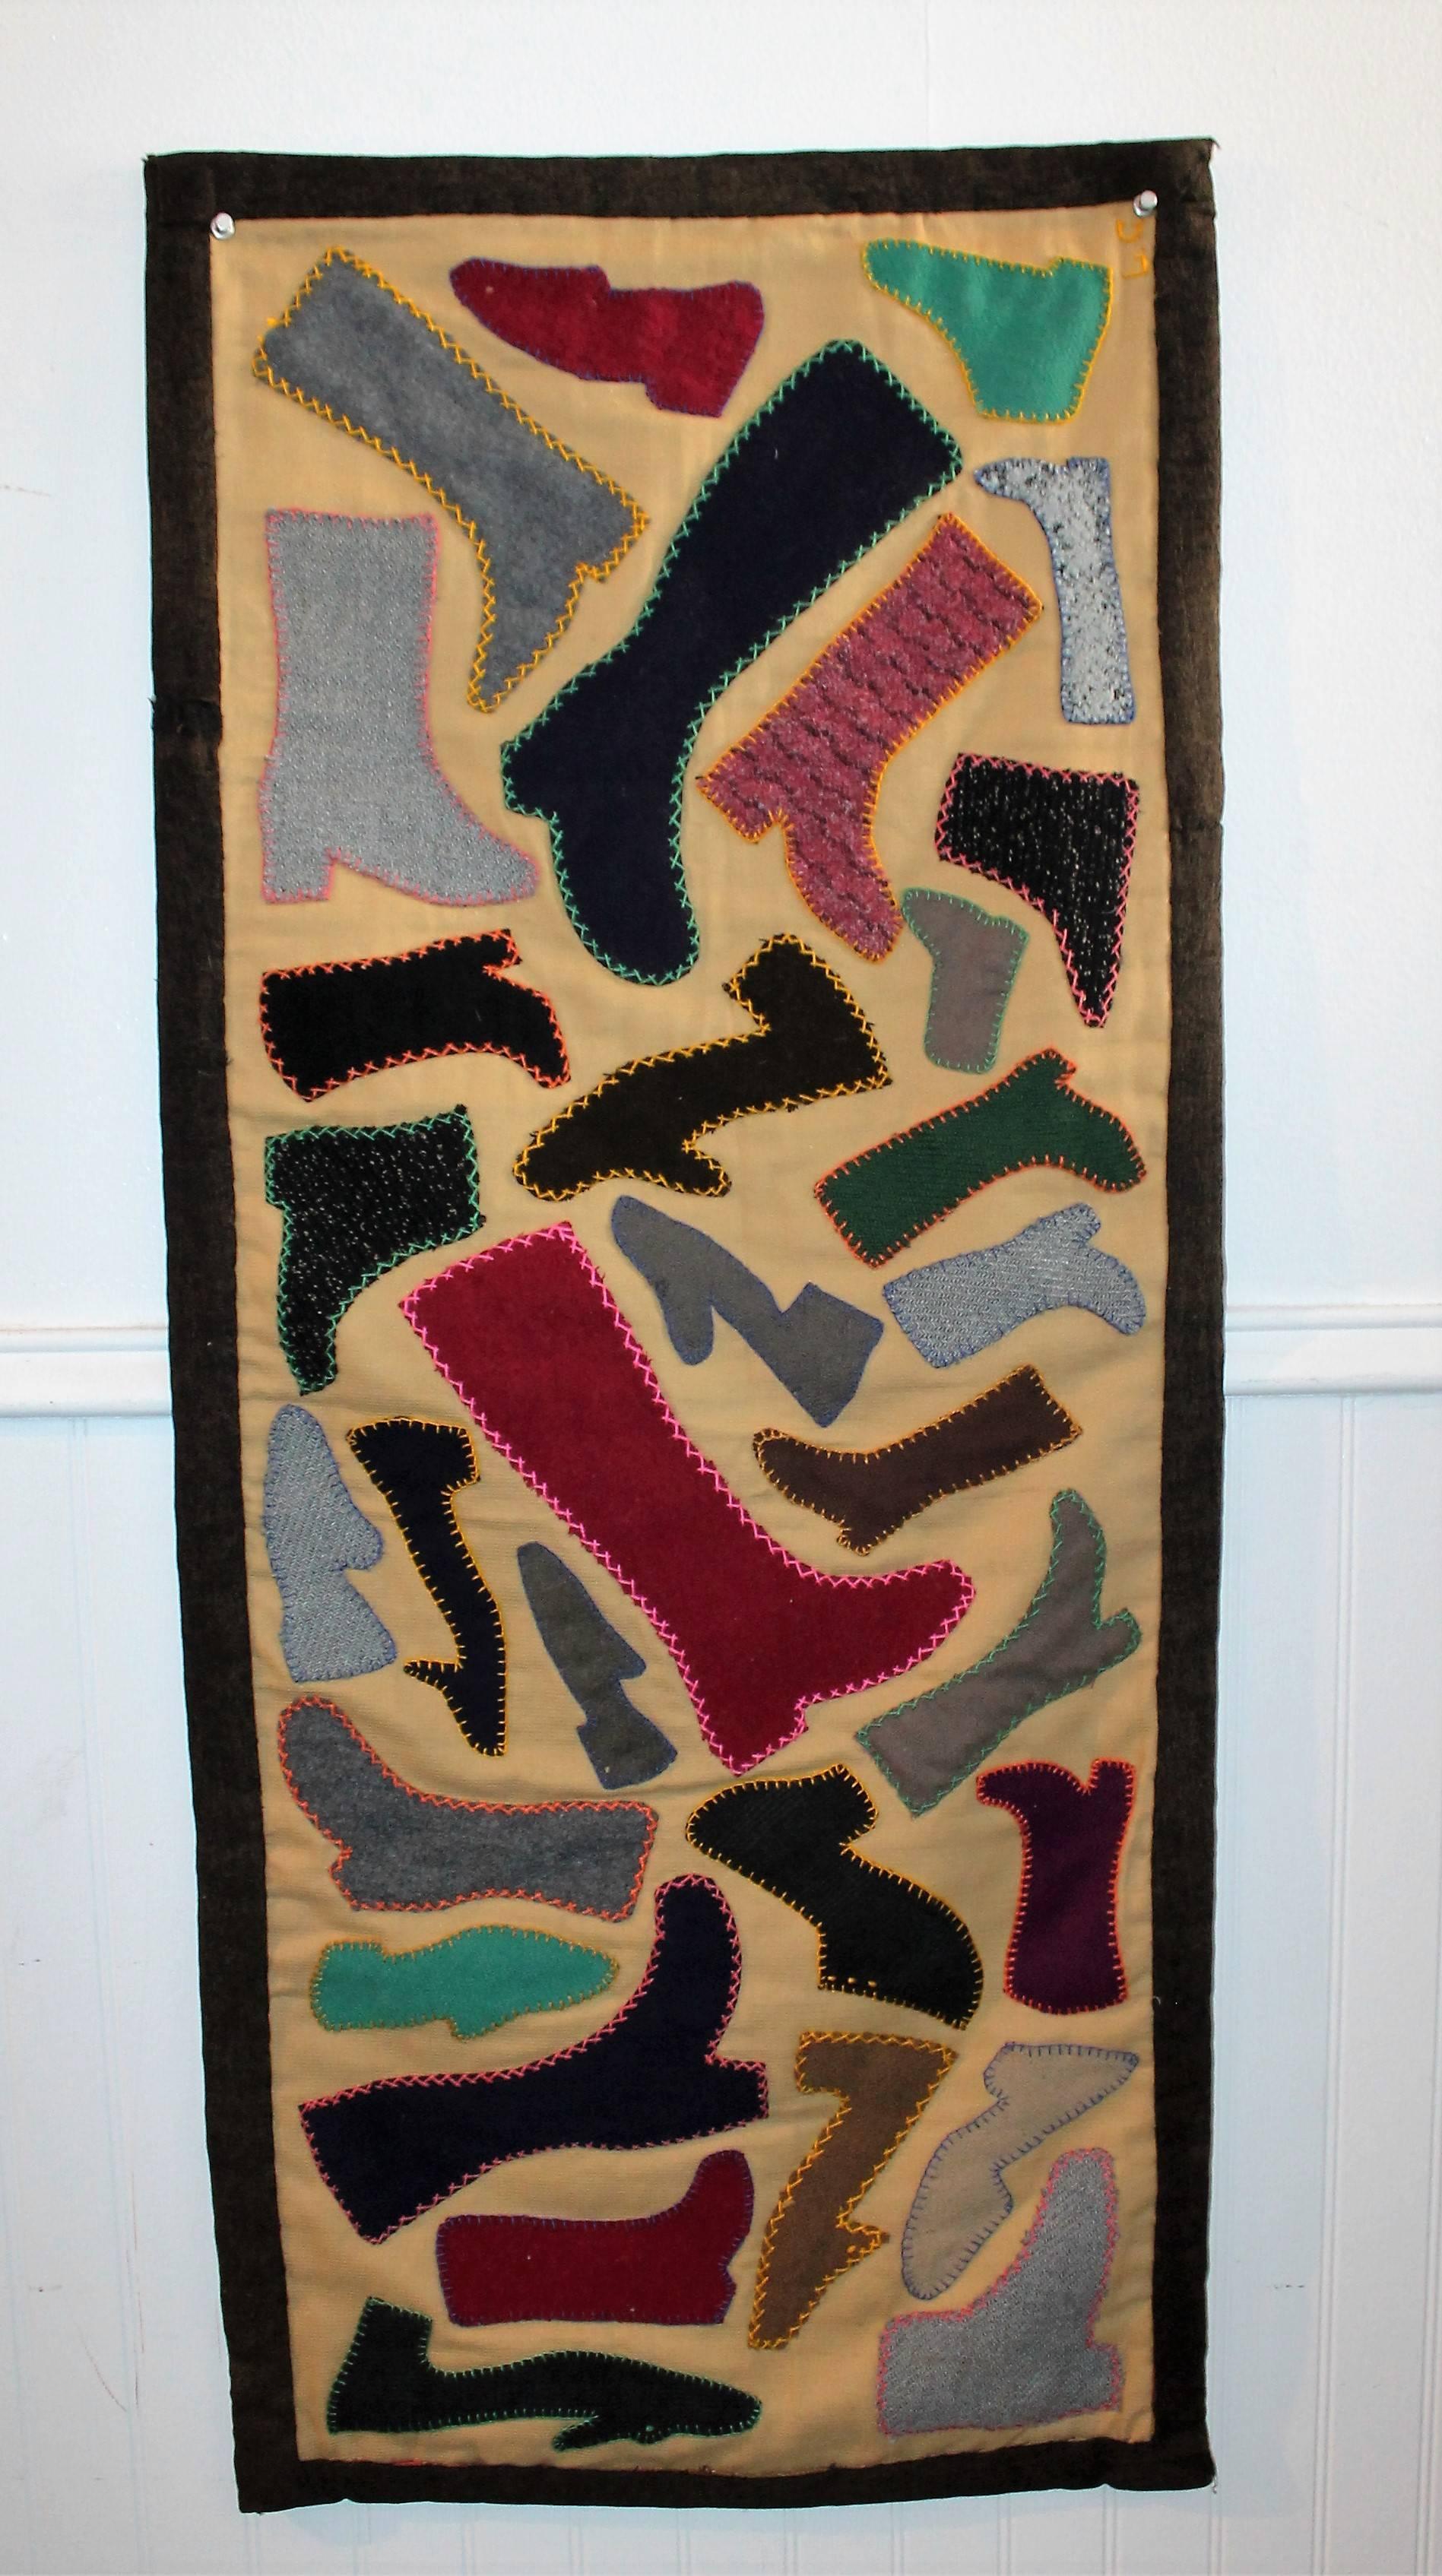 This folky pictorial handmade wool boot and shoe applique runner has the original blue ticking backing. This wonderful Folk Art textile has a velcro backing trim for hanging on a wall or framed stretcher. The binding edge is made from an old wool